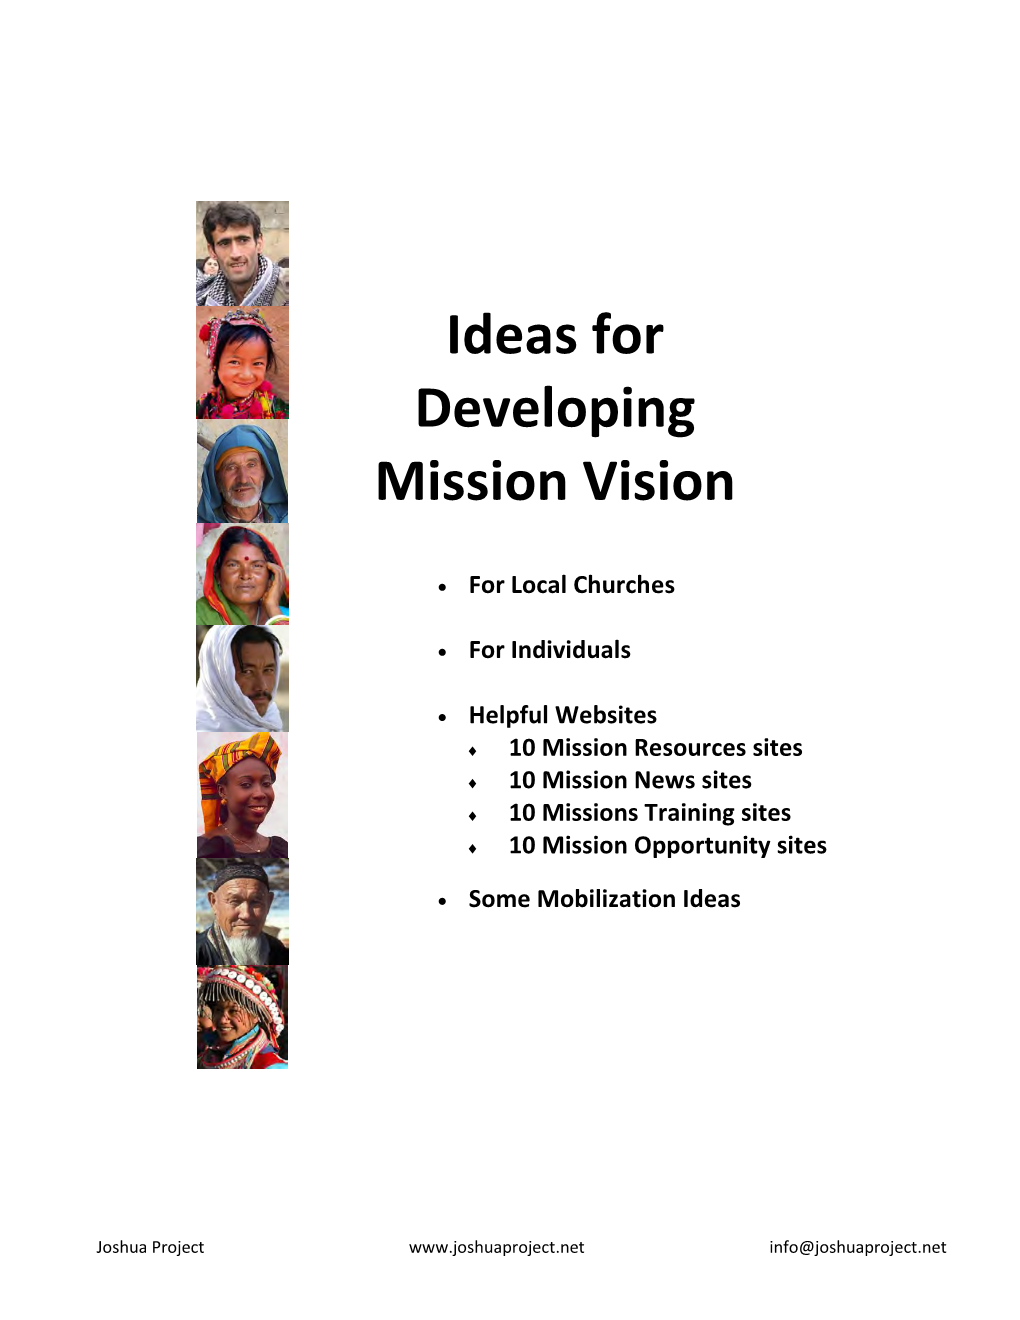 Ideas for Developing Mission Vision